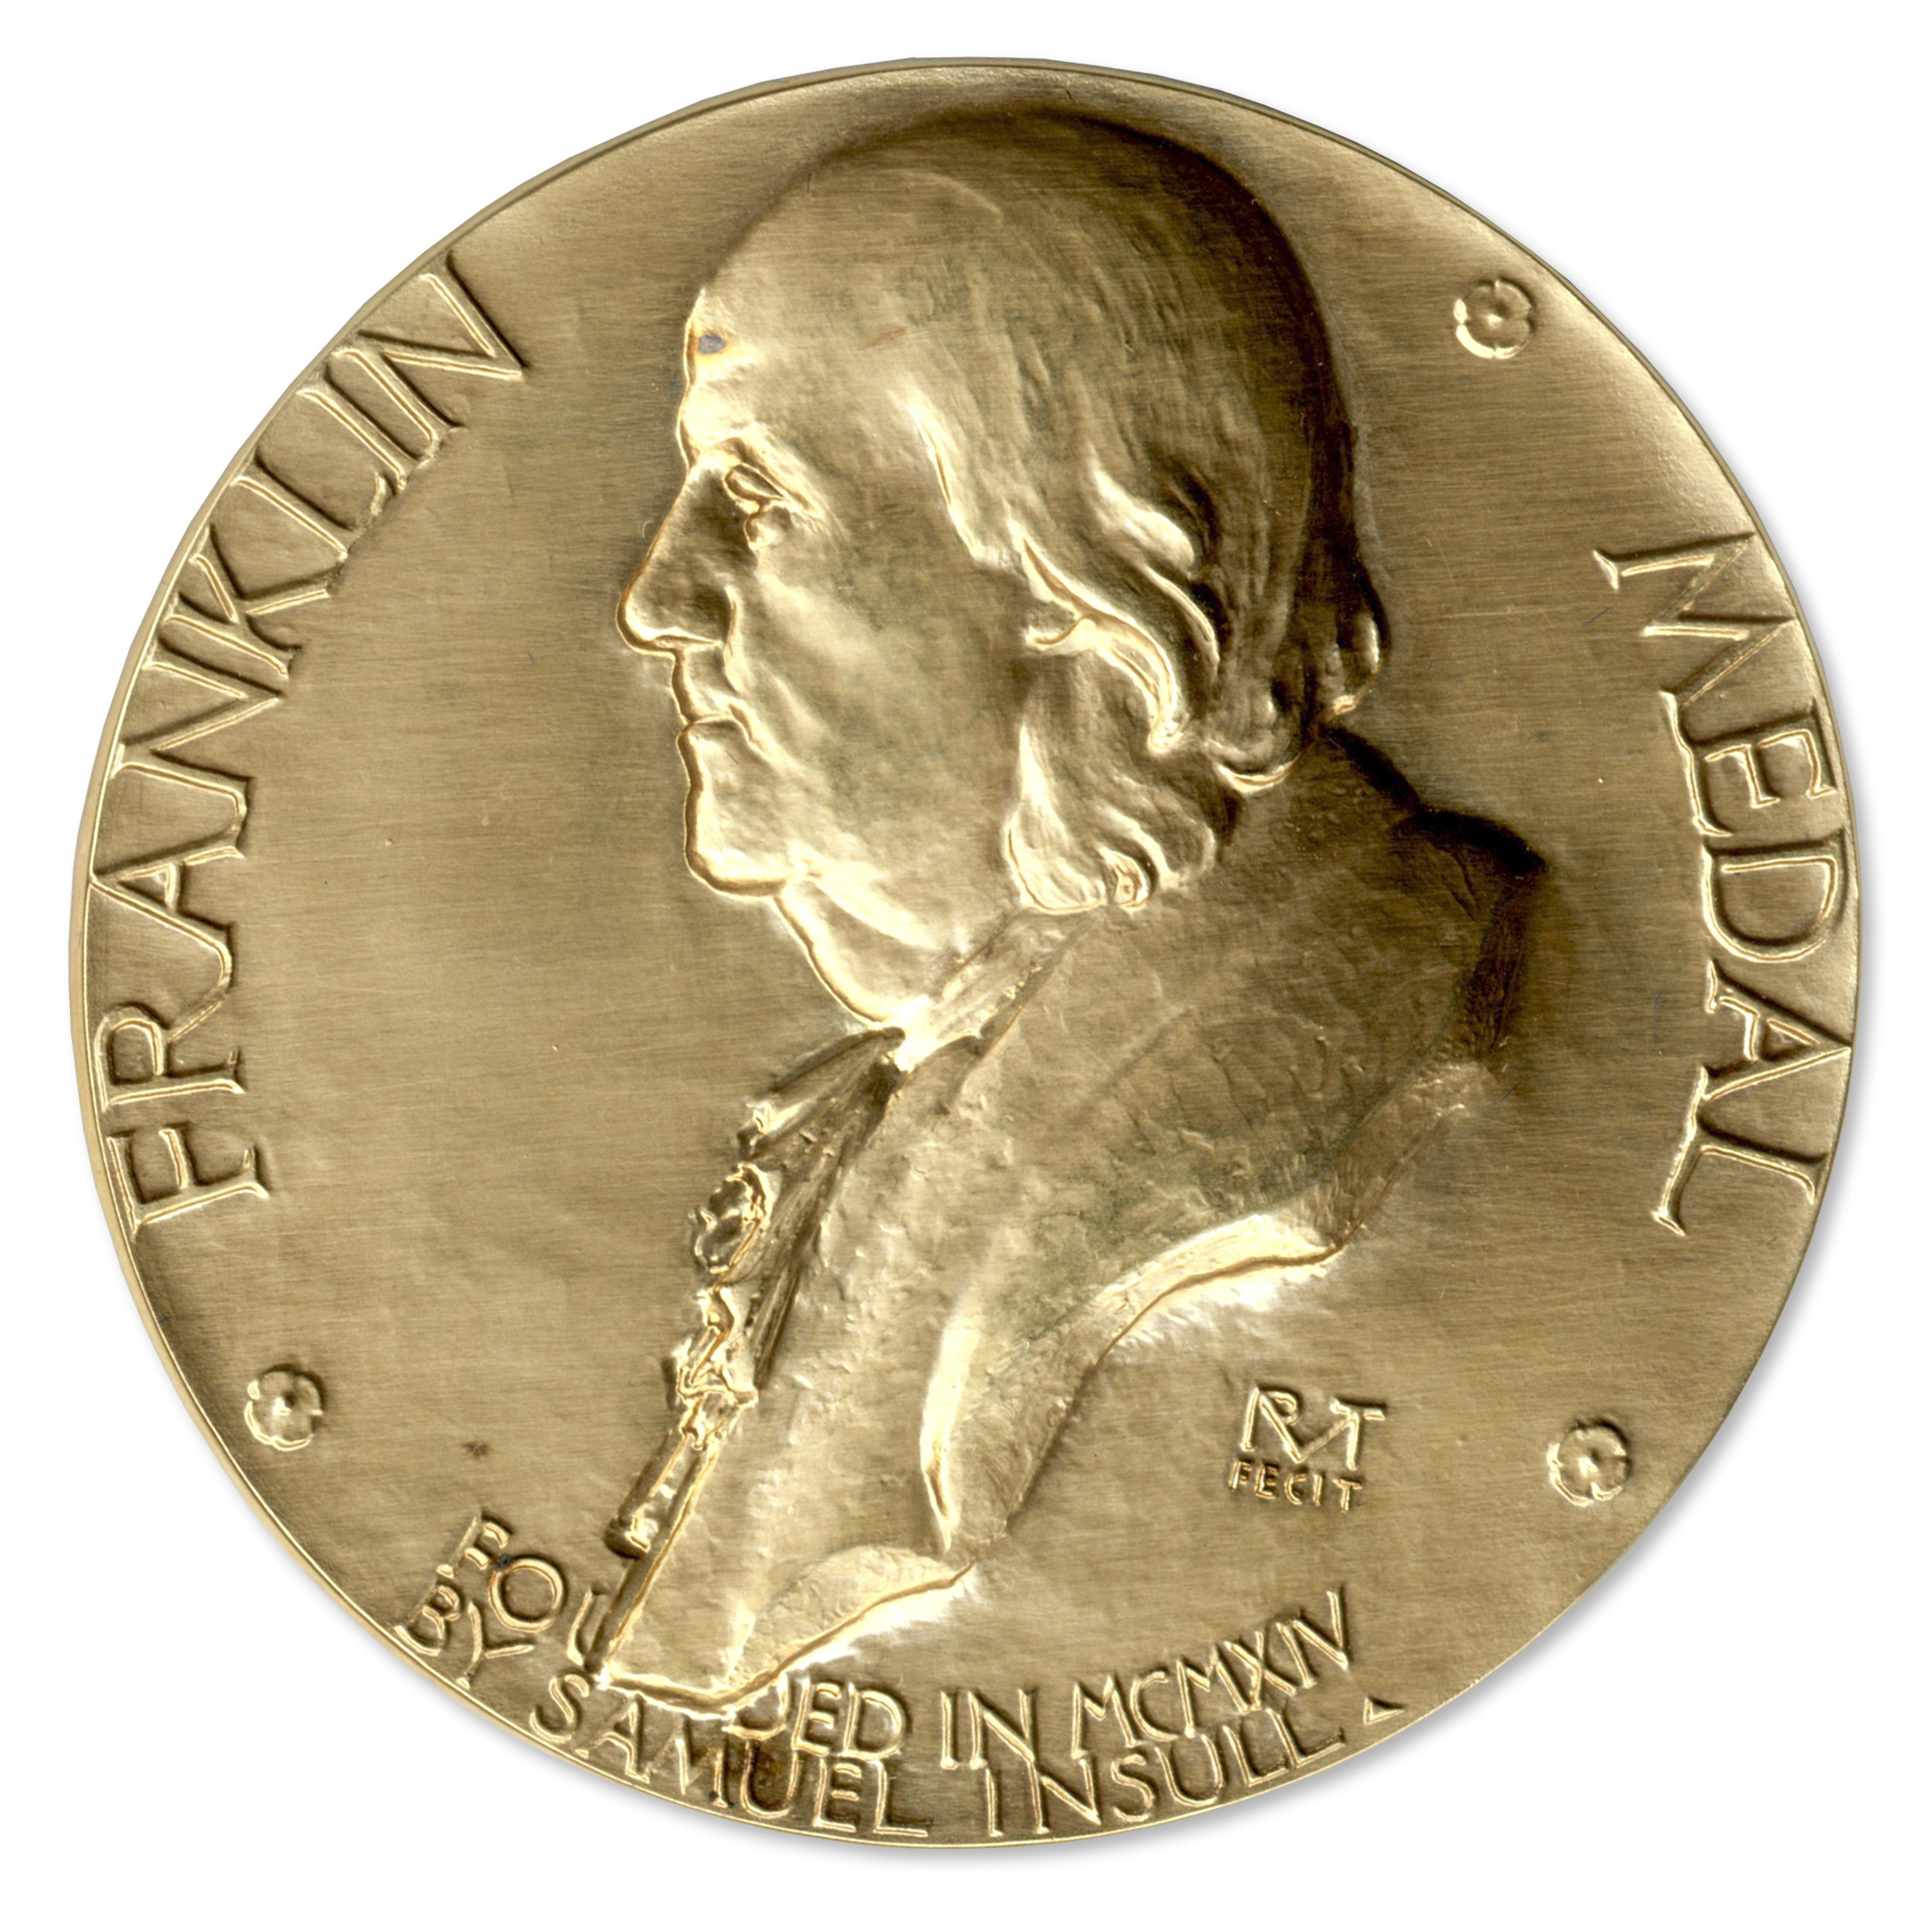 Announced the names of the winners of the "Benjamin Franklin Medal"